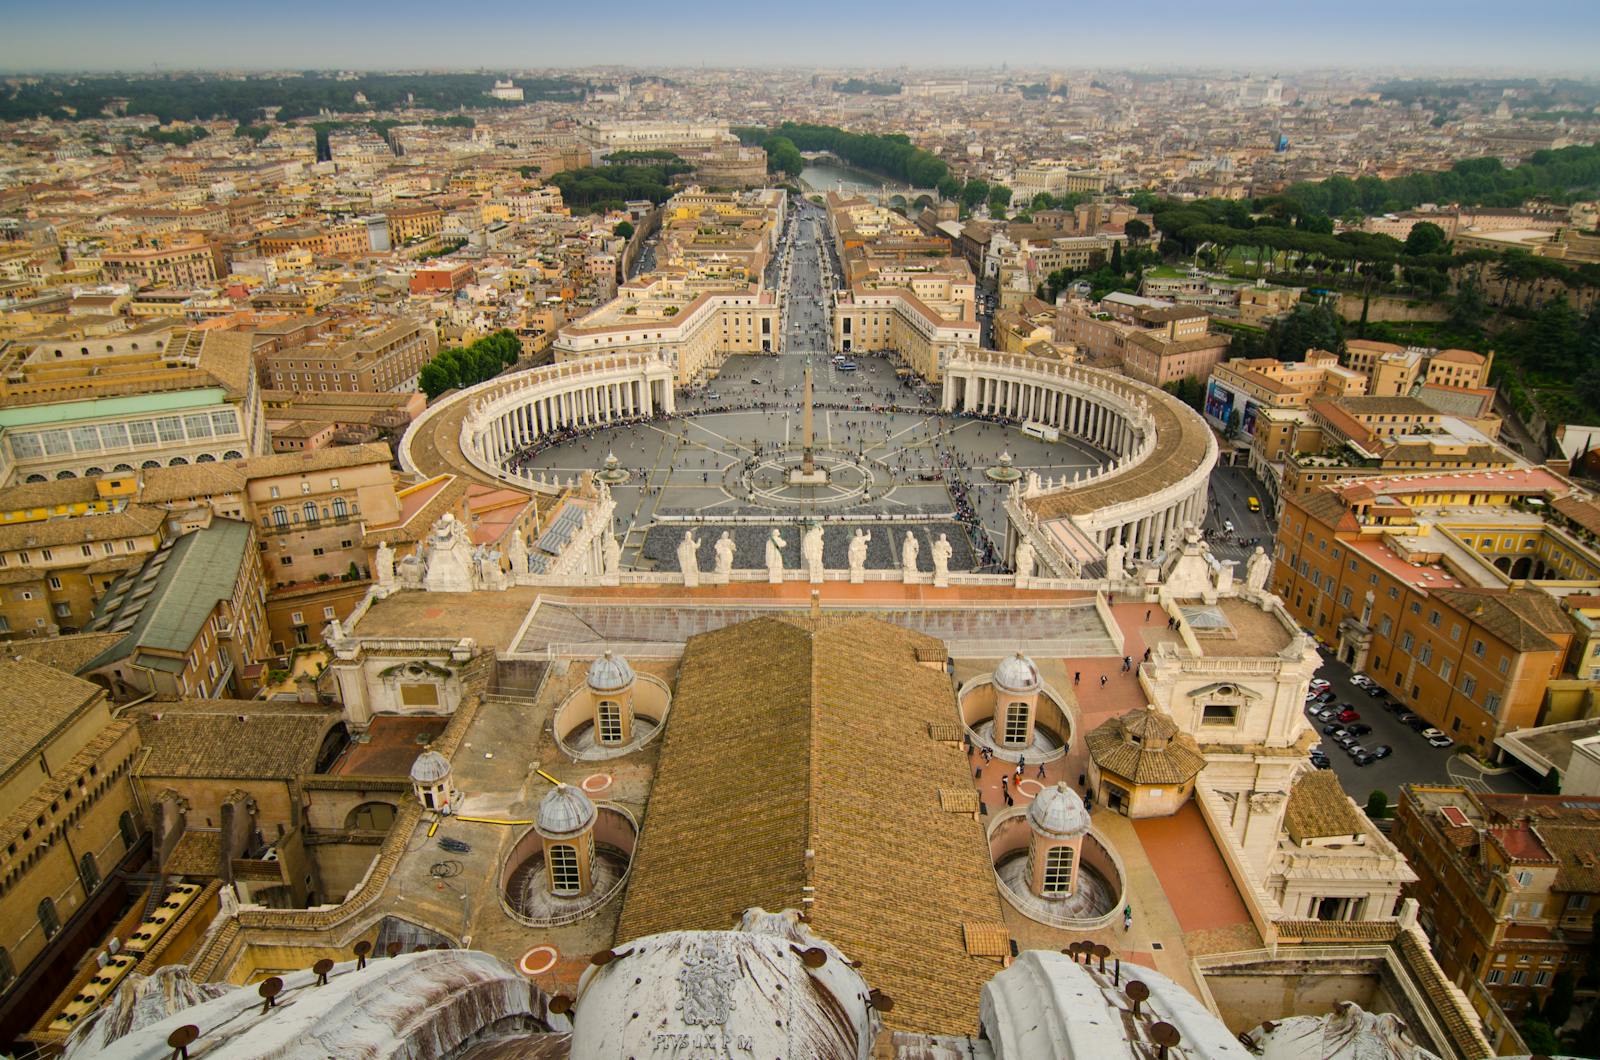 Aerial View of Vatican City